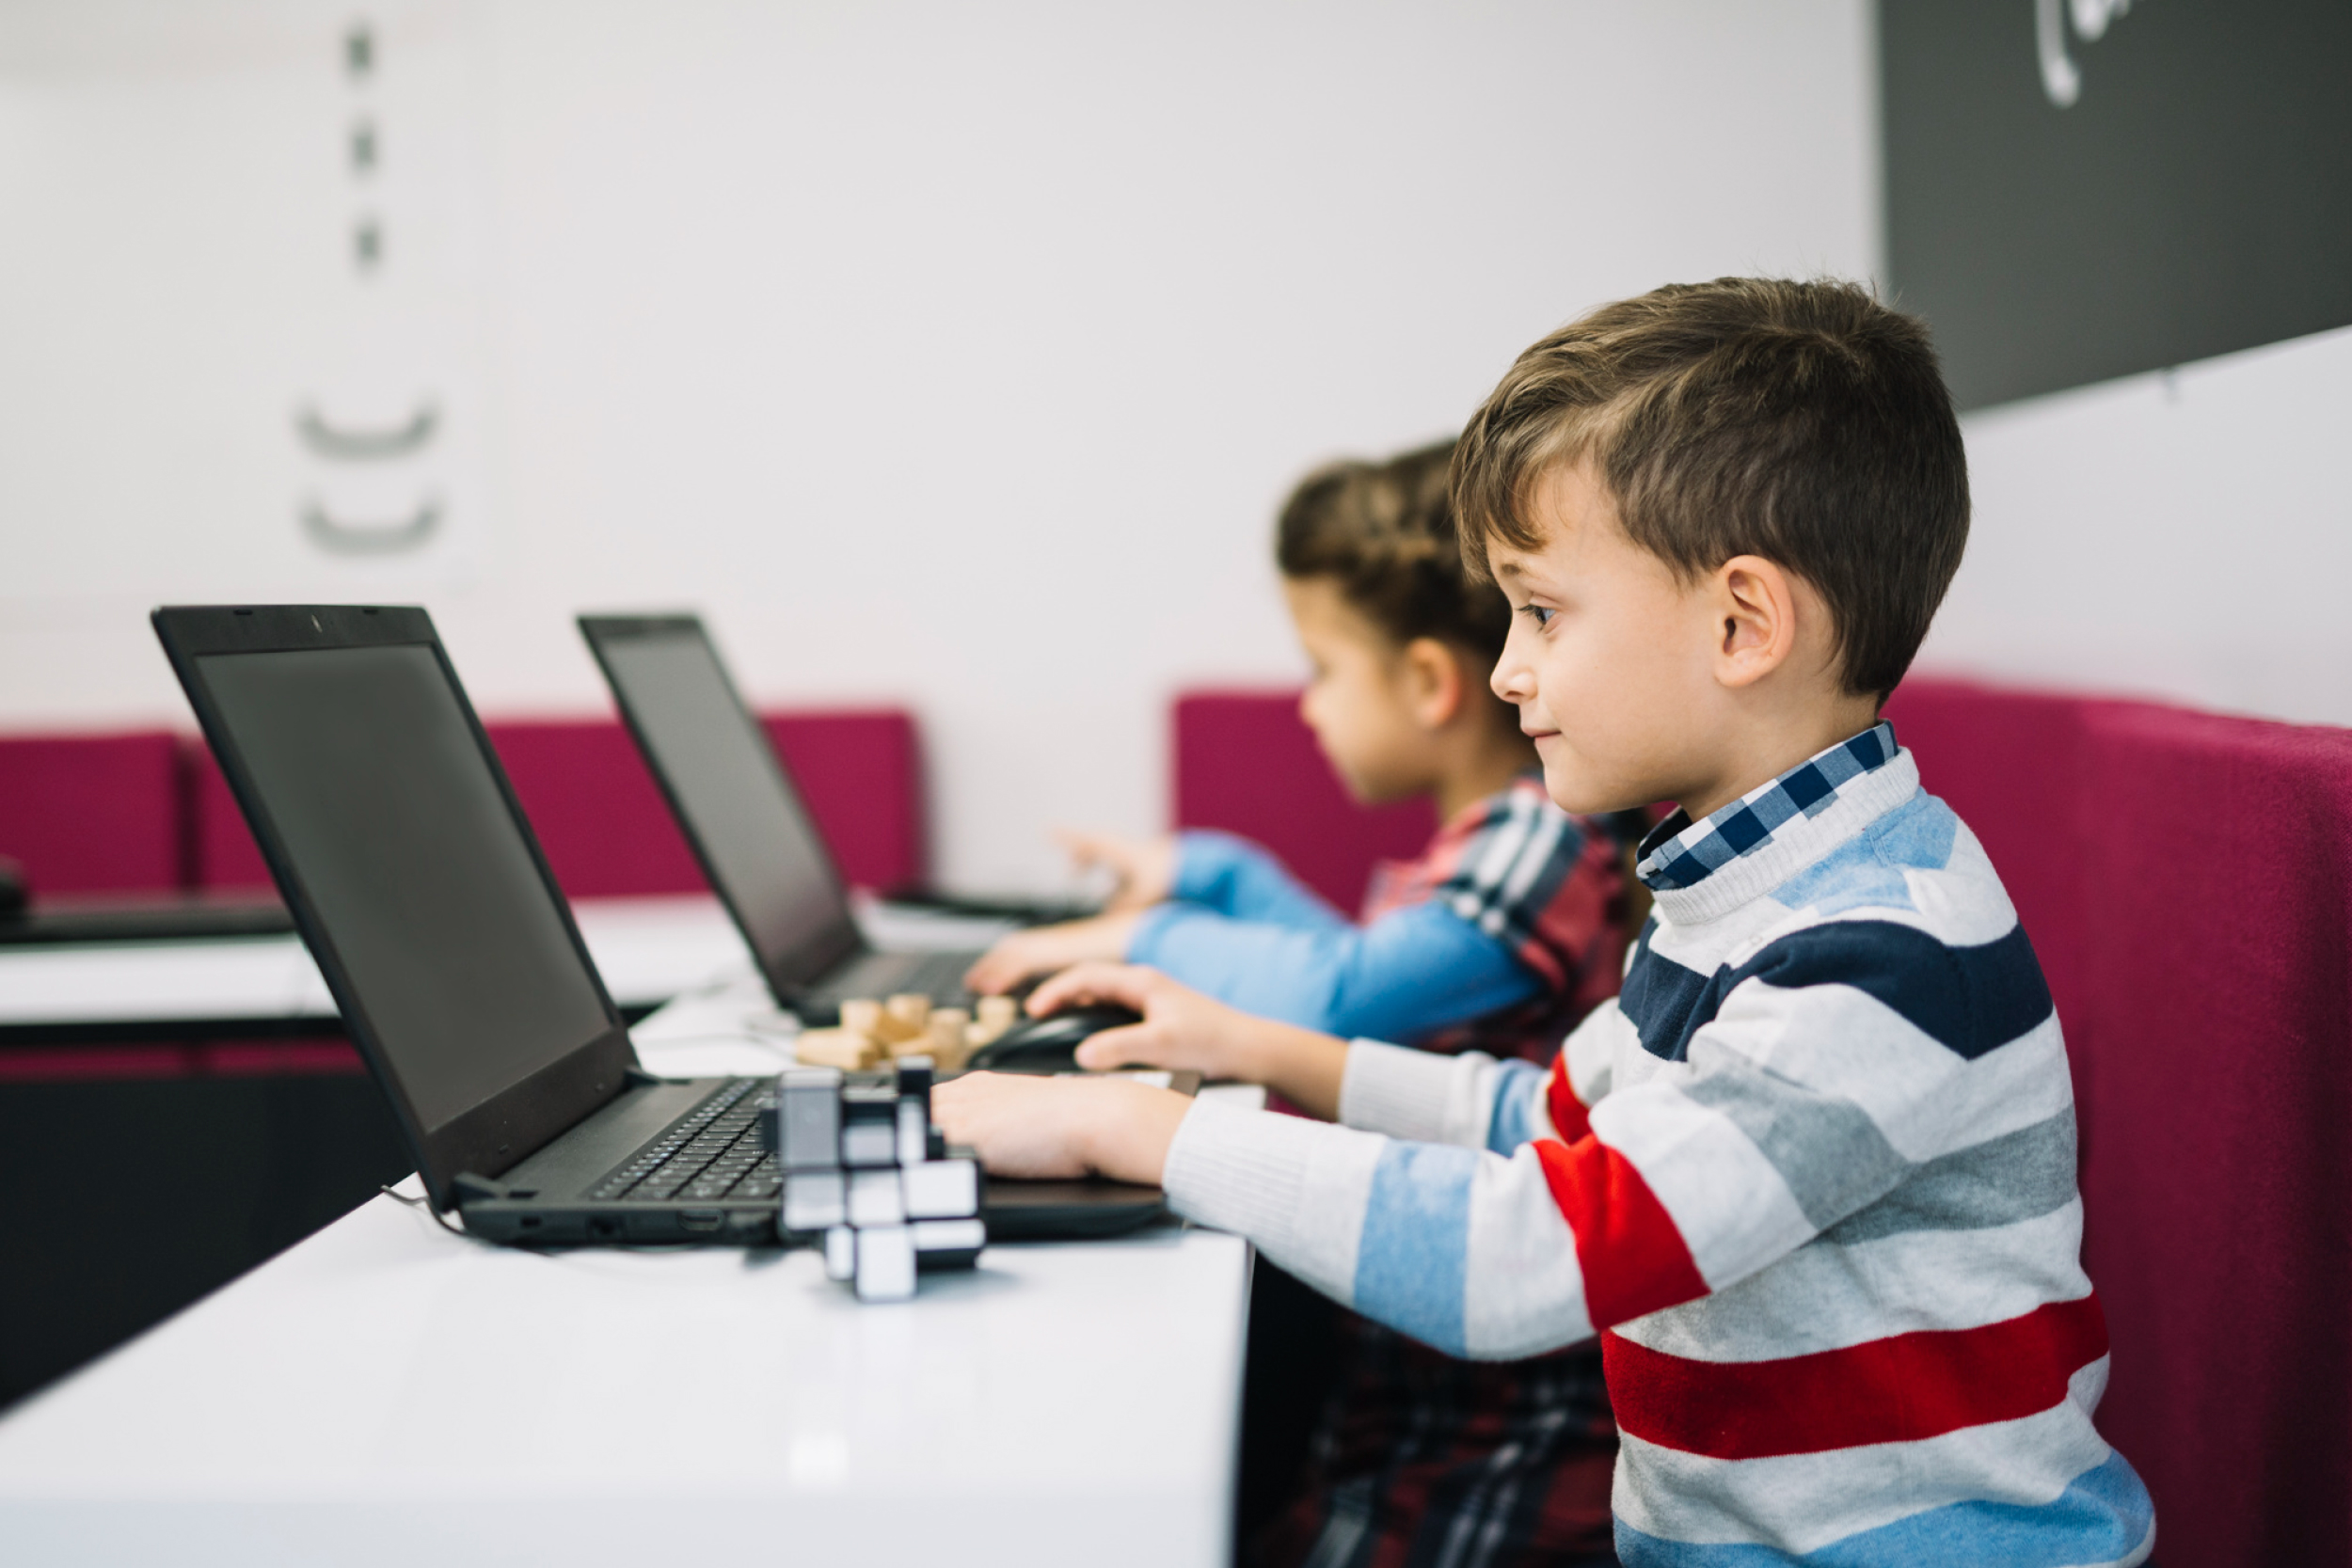 Fun Coding Classes to Unlock Your Child’s Potential